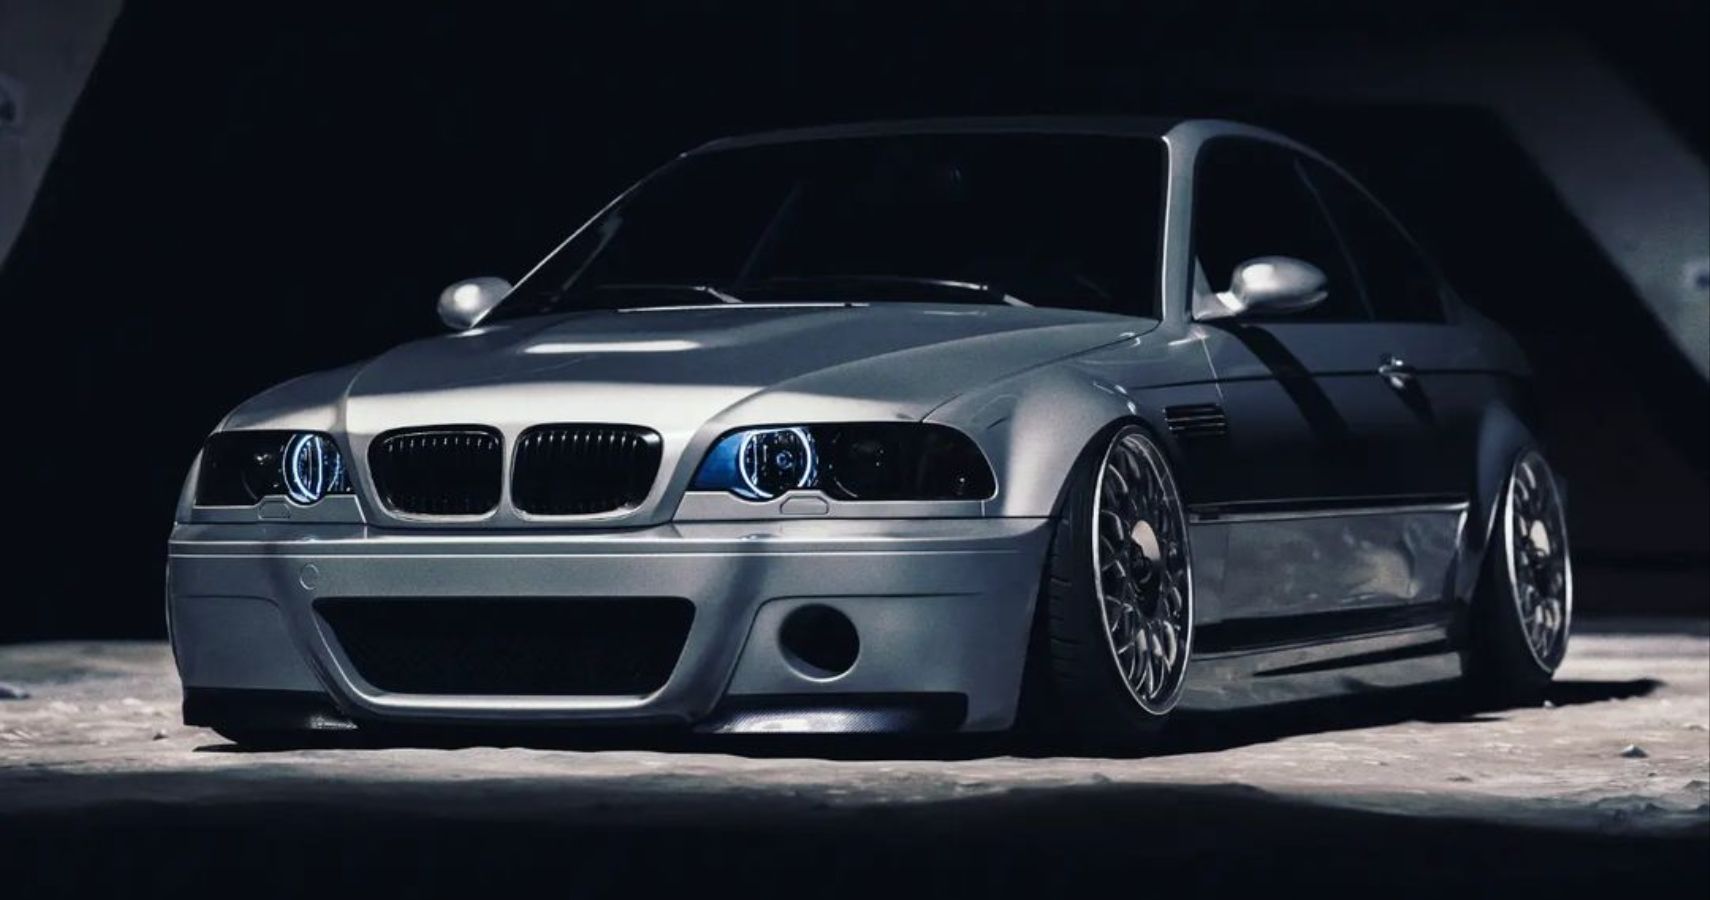 Our BMW E46 M3 Render Shows Just How Extra Modern Sports Cars Have Become